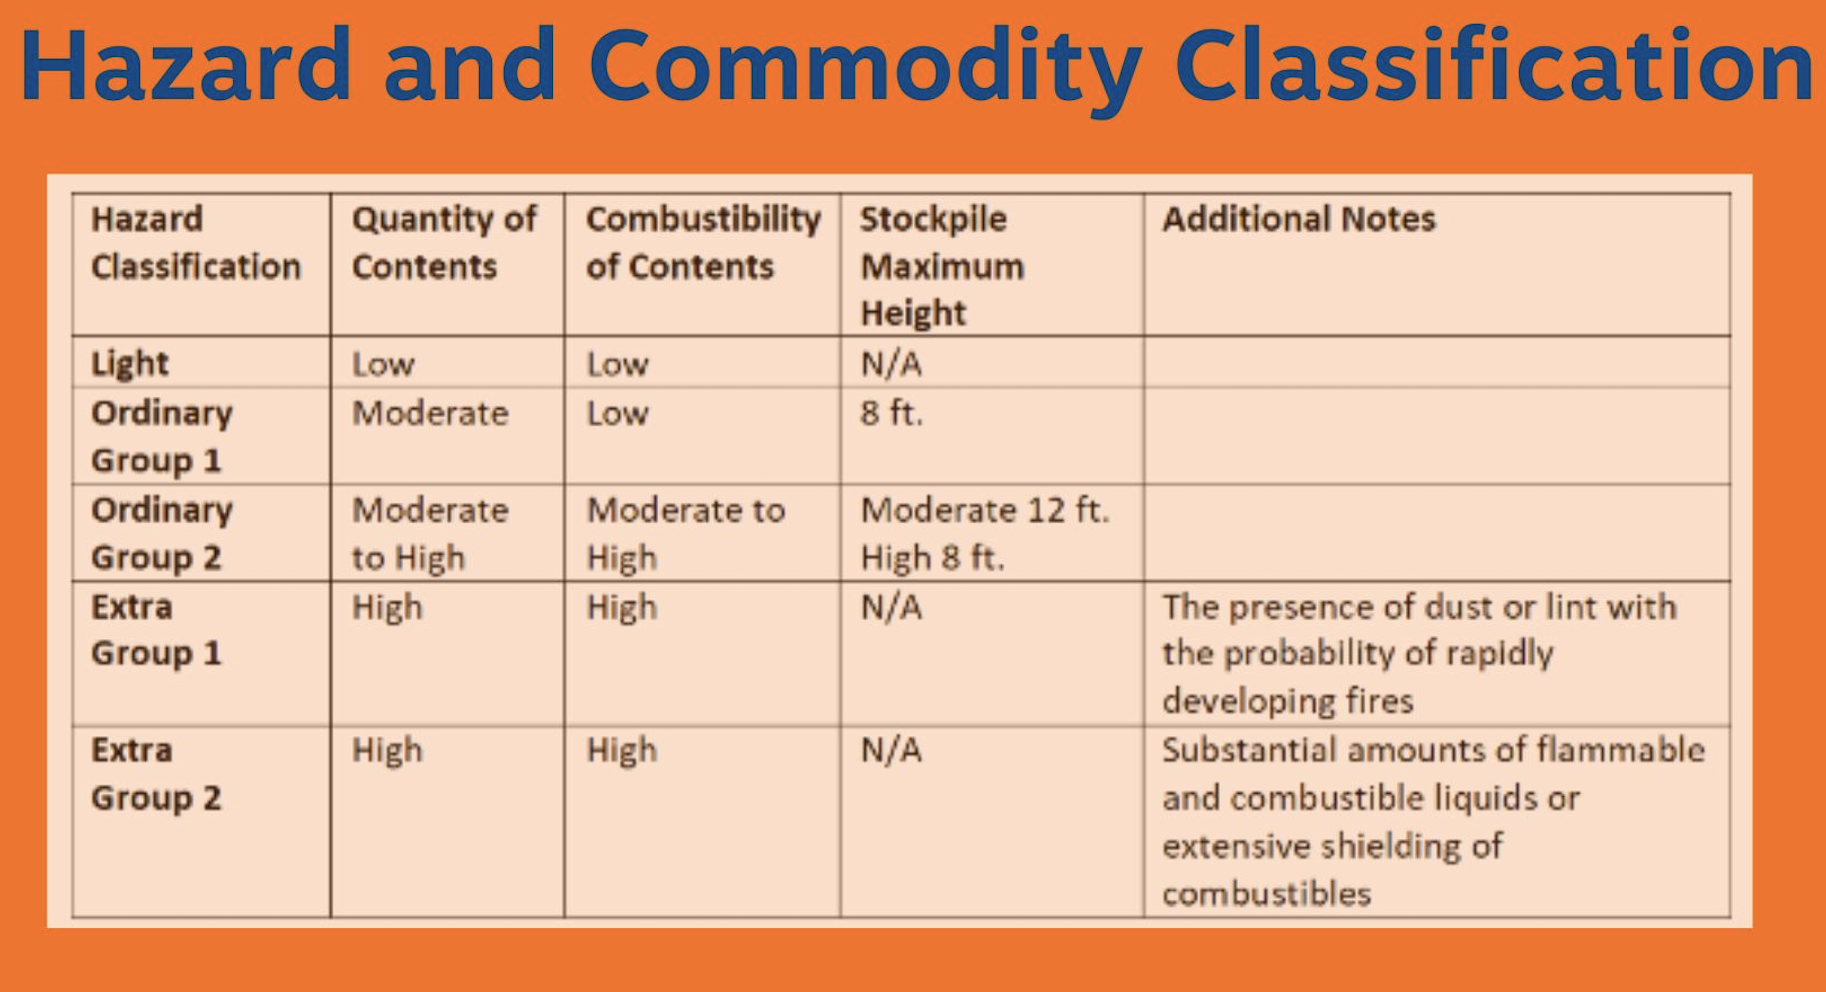 Hazard and Commodity Classification